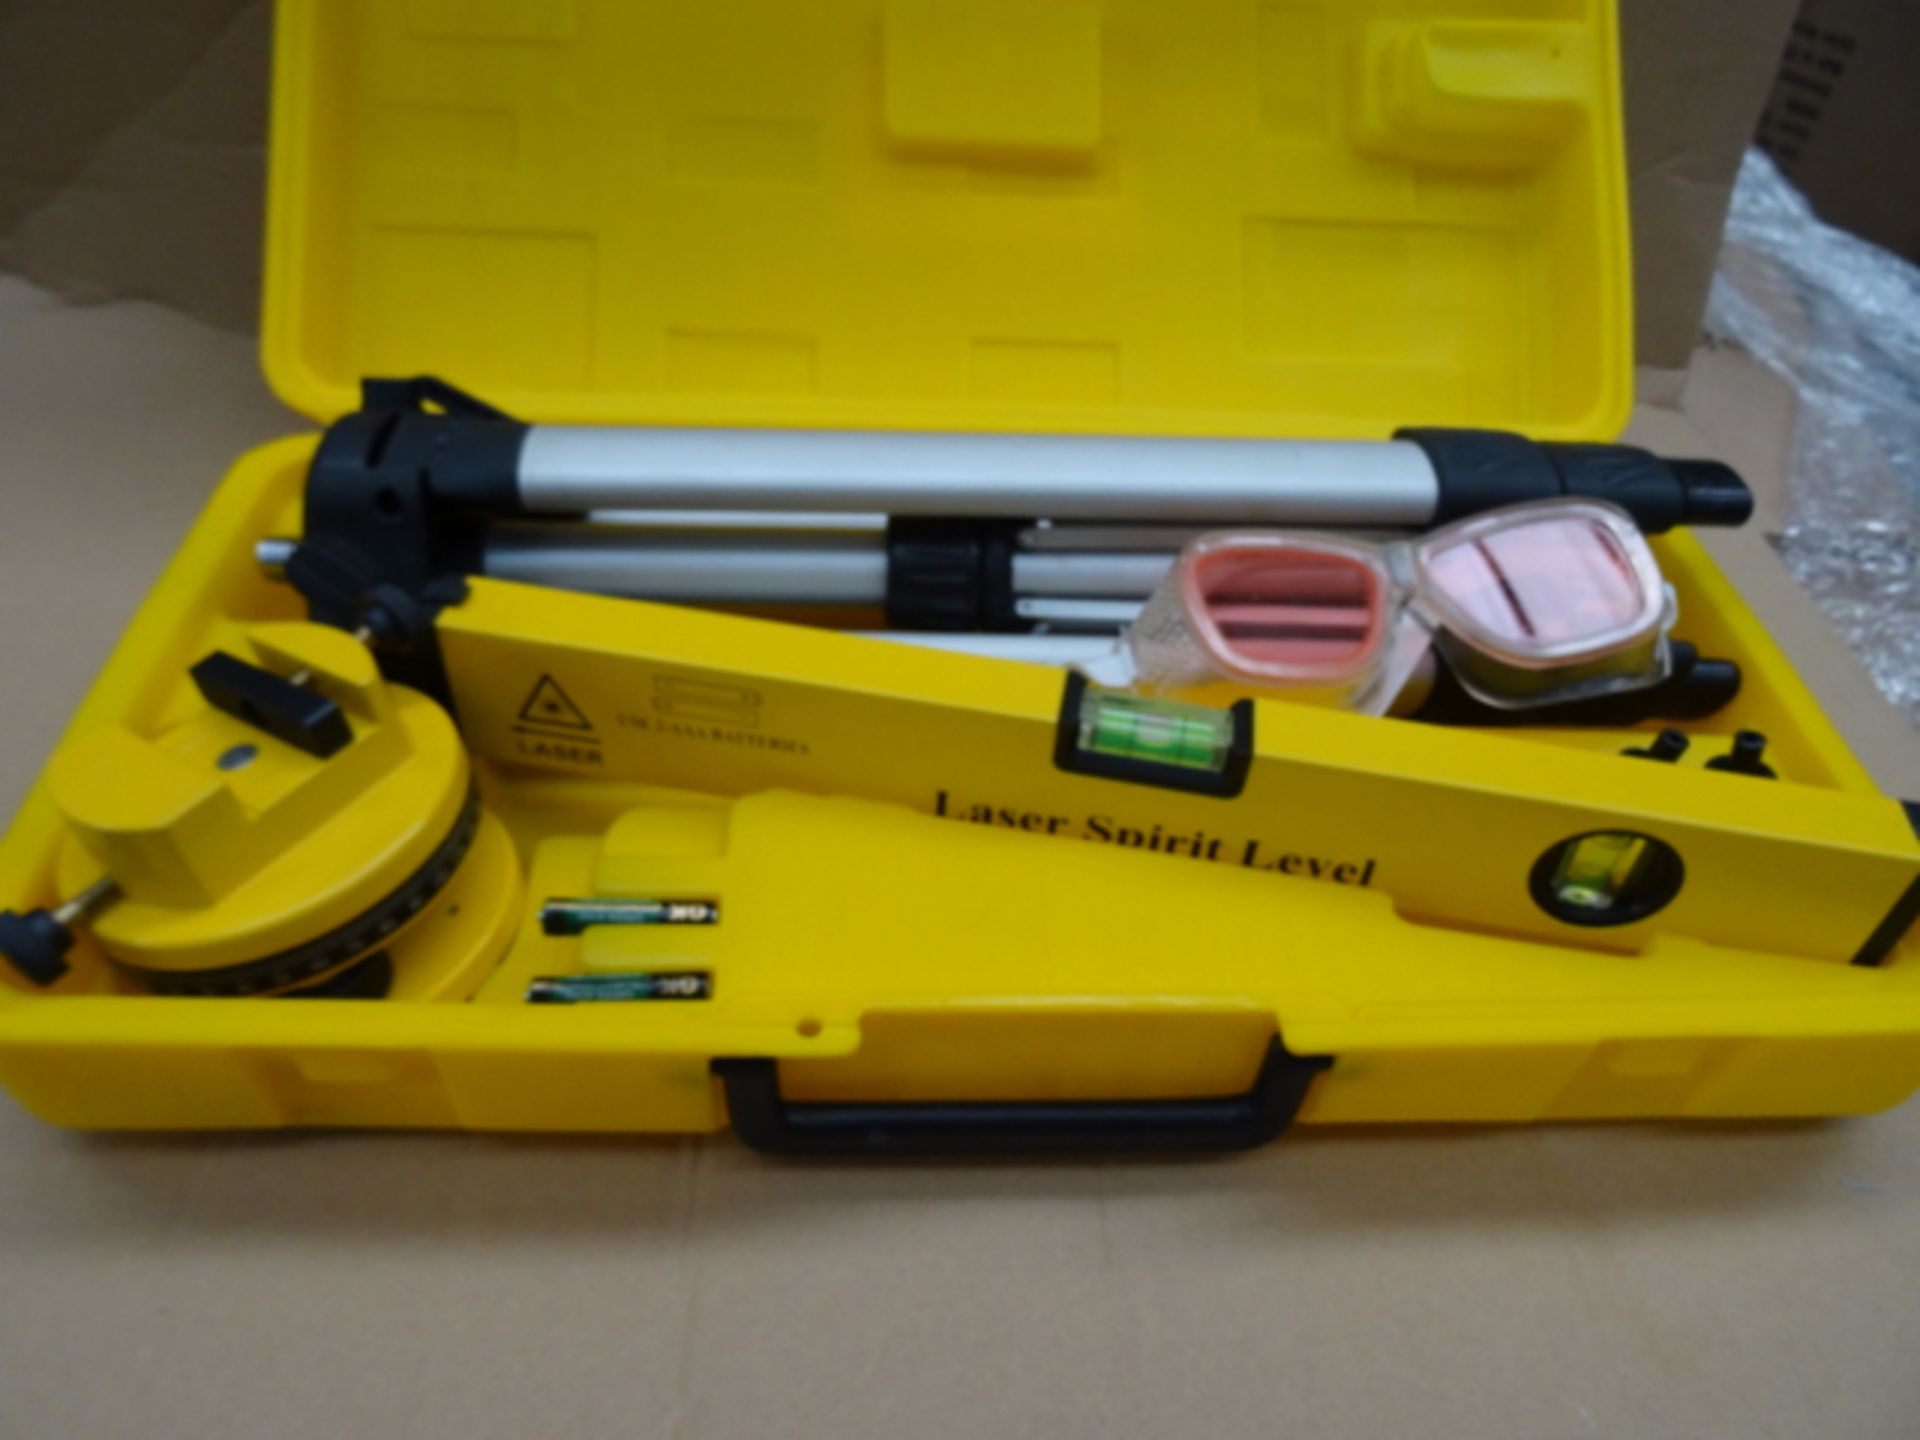 4 x Laser Level Kits. Very high quality. RRP £49 Each. Total RRP £196! Brand new and Packaged stock!